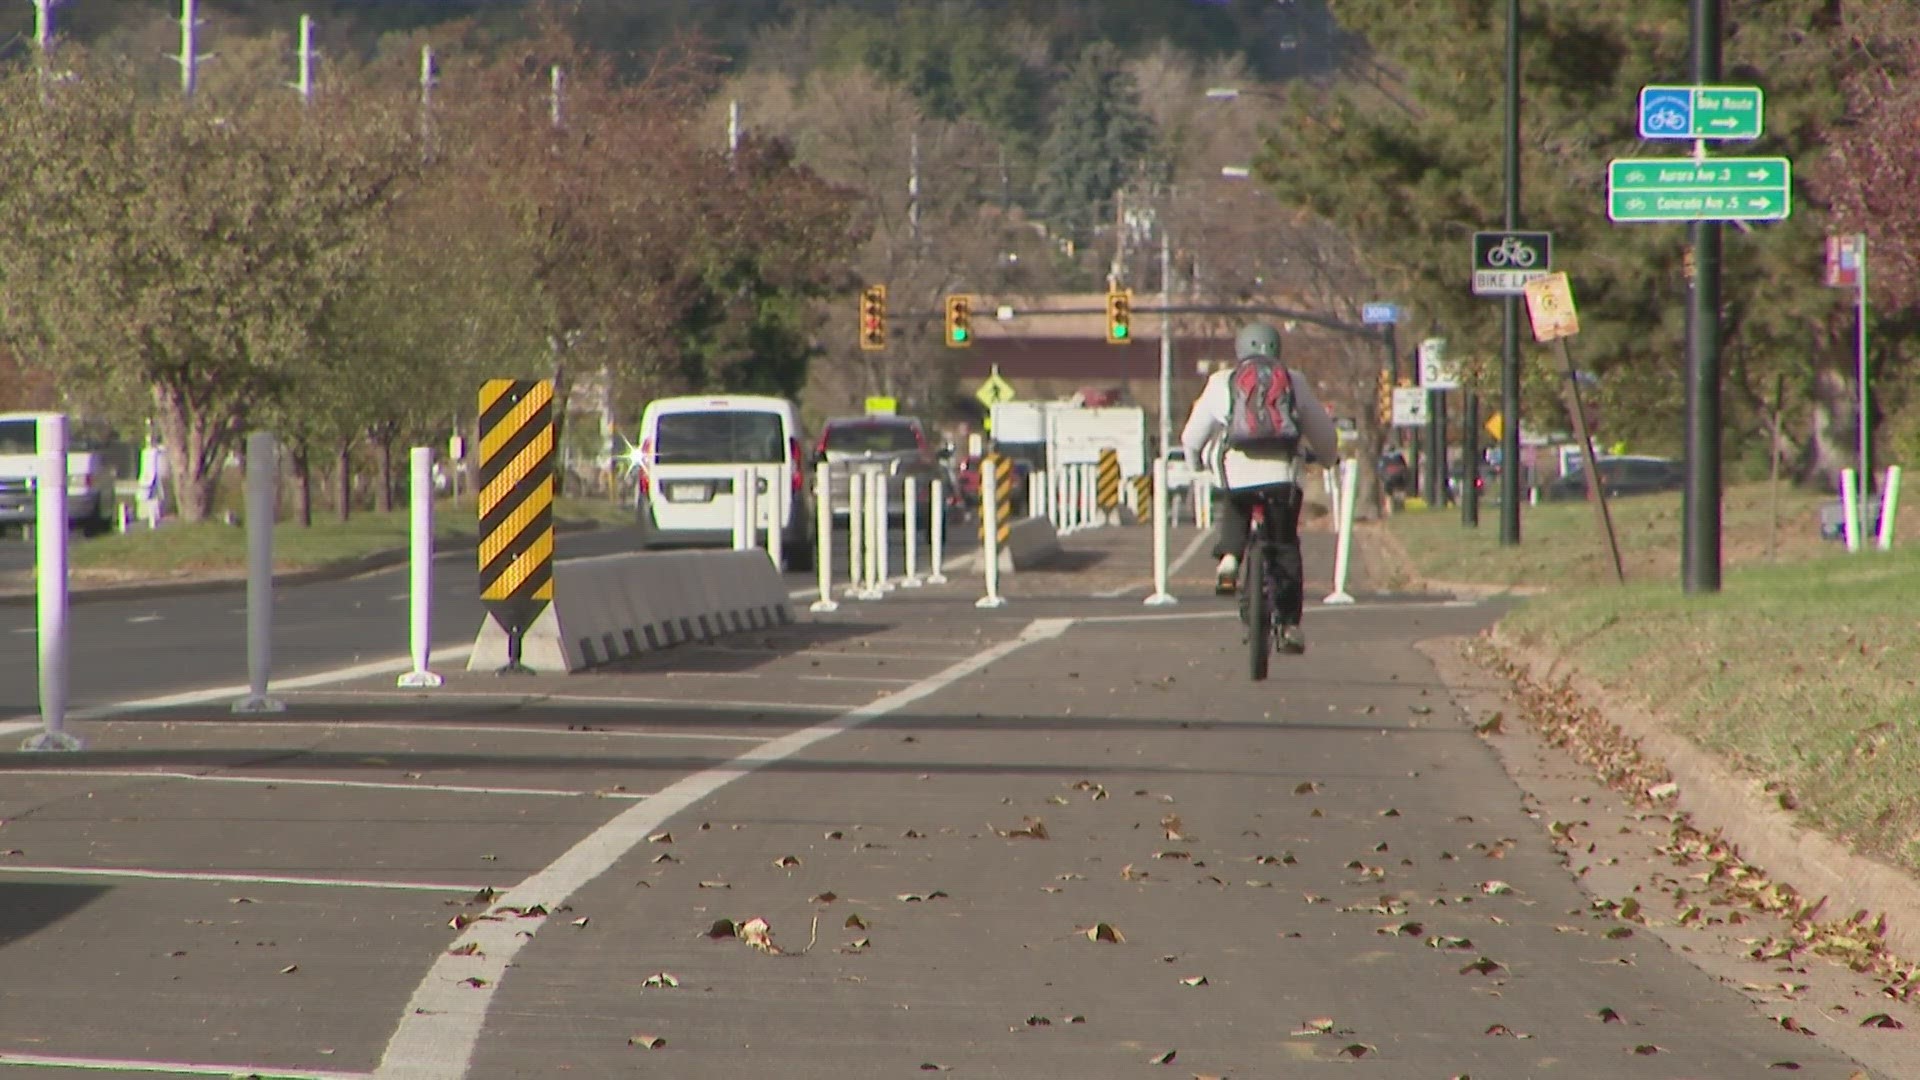 Boulder is the first city in the country to install tall concrete curbs to separate bikes from vehicles lanes in an effort to keep cyclists and drivers safe.